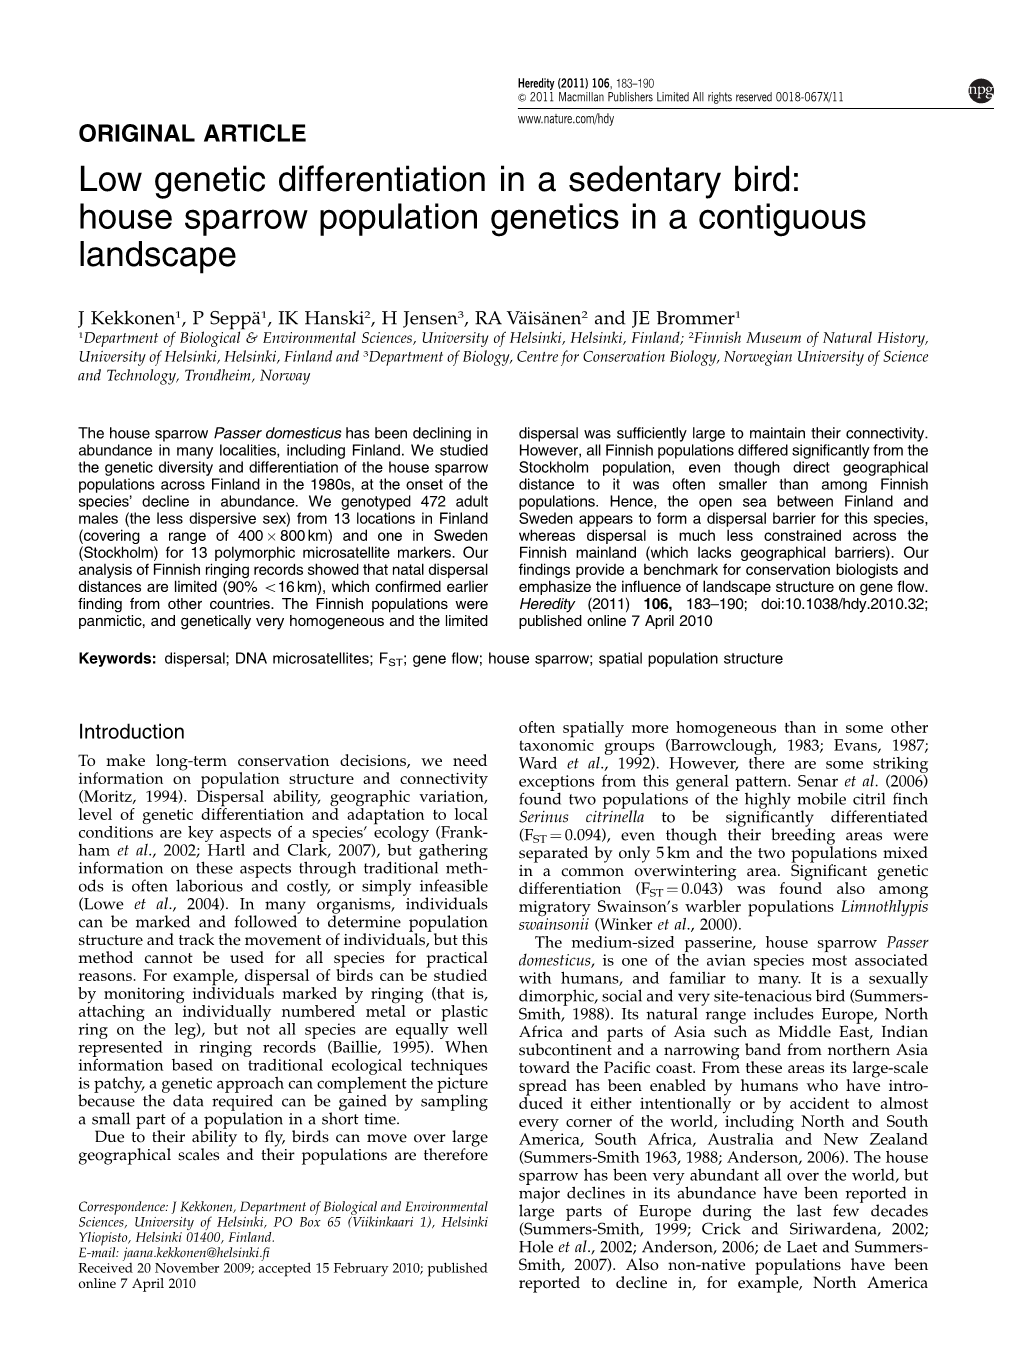 Low Genetic Differentiation in a Sedentary Bird: House Sparrow Population Genetics in a Contiguous Landscape